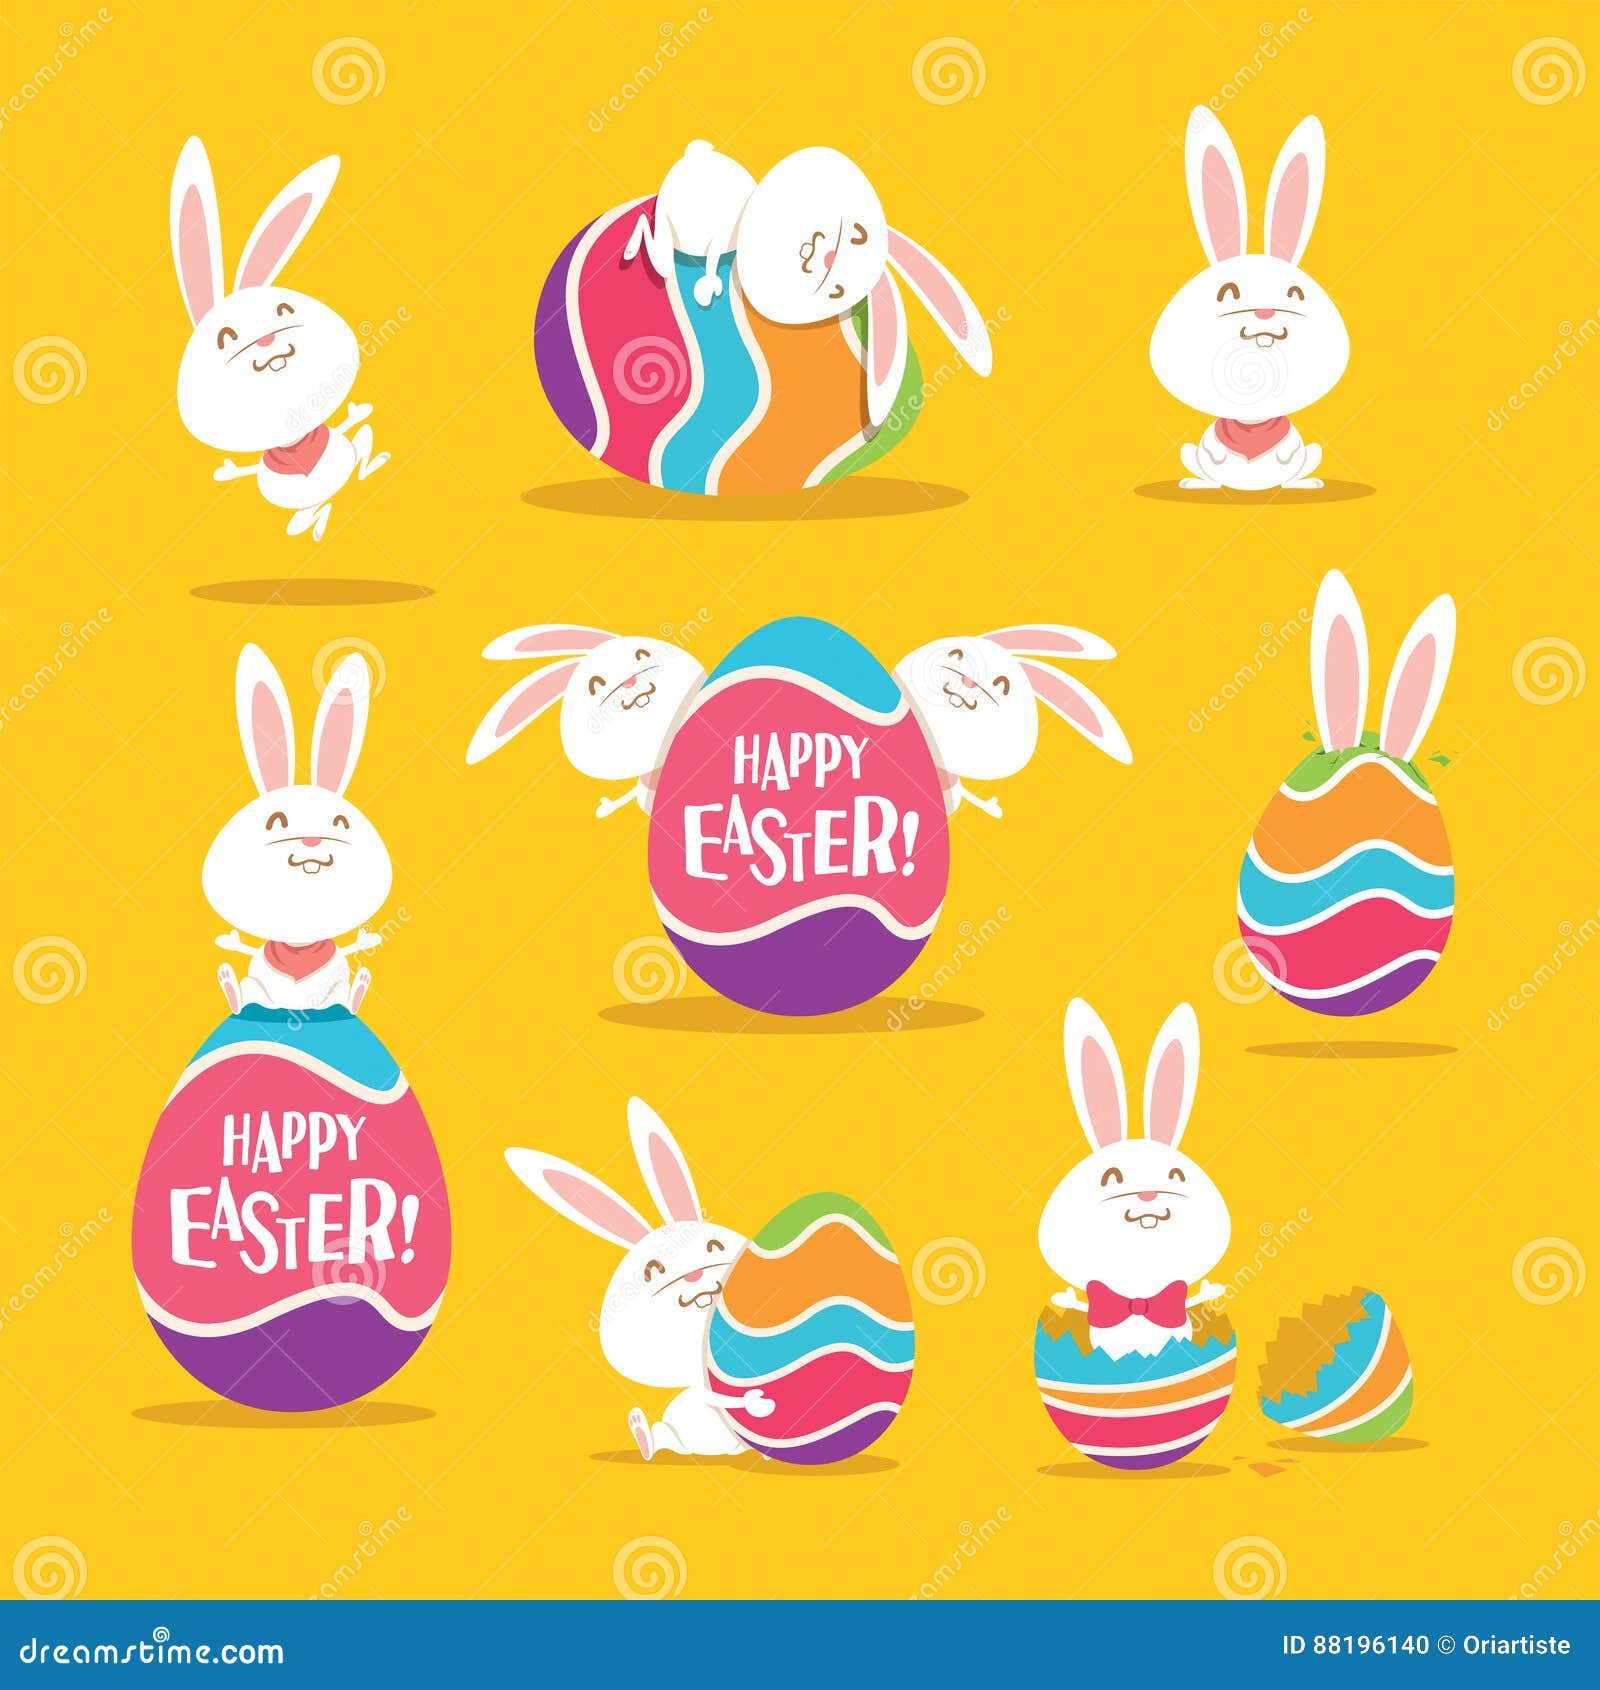 Collection of Easter Bunny and Egg Stock Vector - Illustration of copy ...